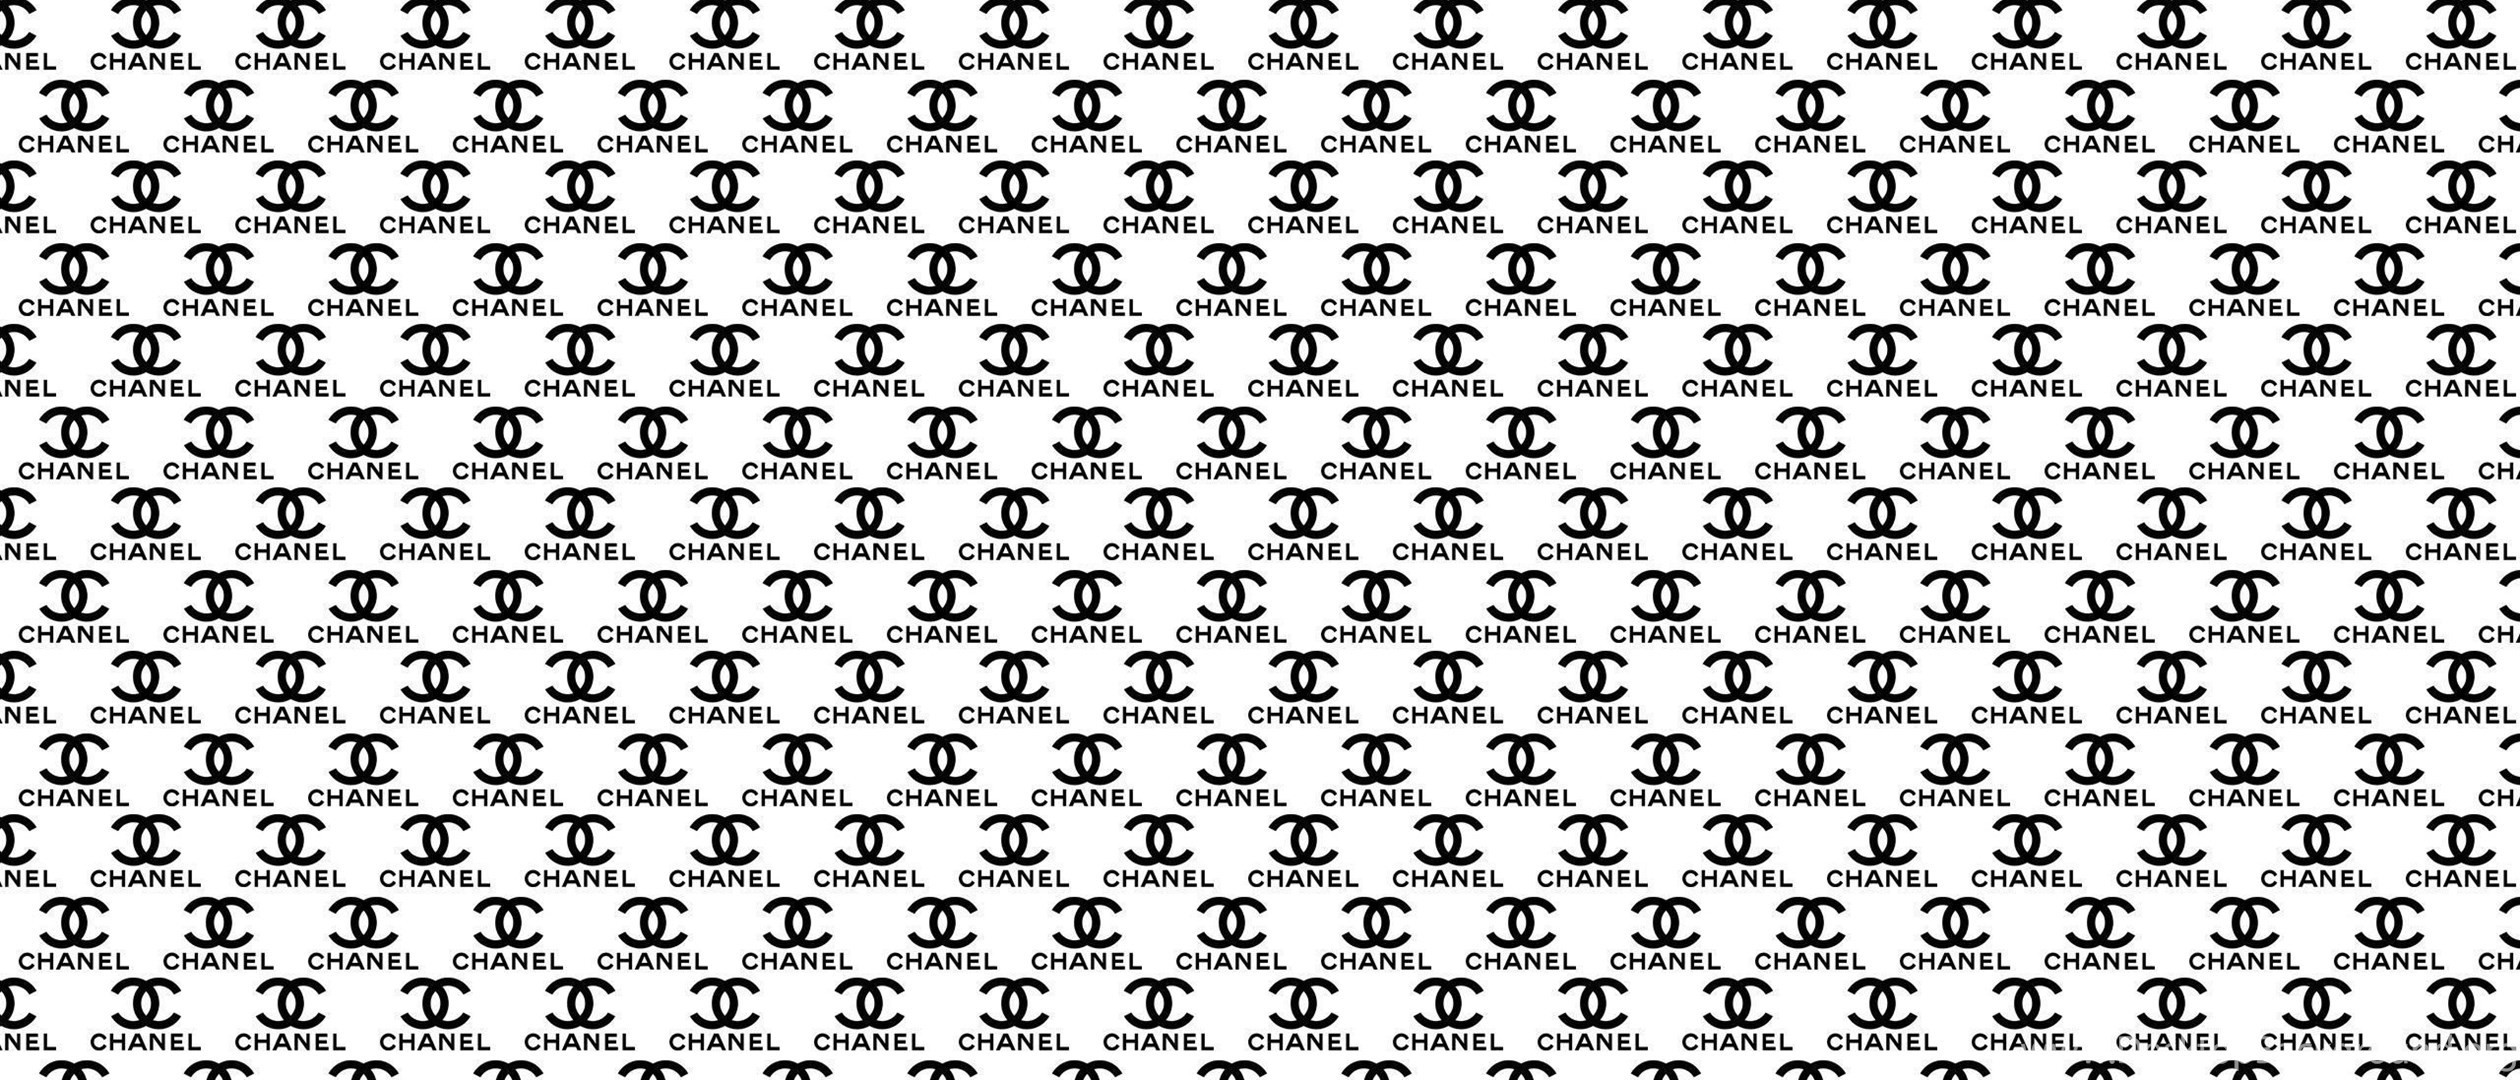 2520x1080 1080x1920 Coco Chanel Flowers Pattern Logo Wallpaper. Chanel Logo Wallpapers  66 Background Pictures